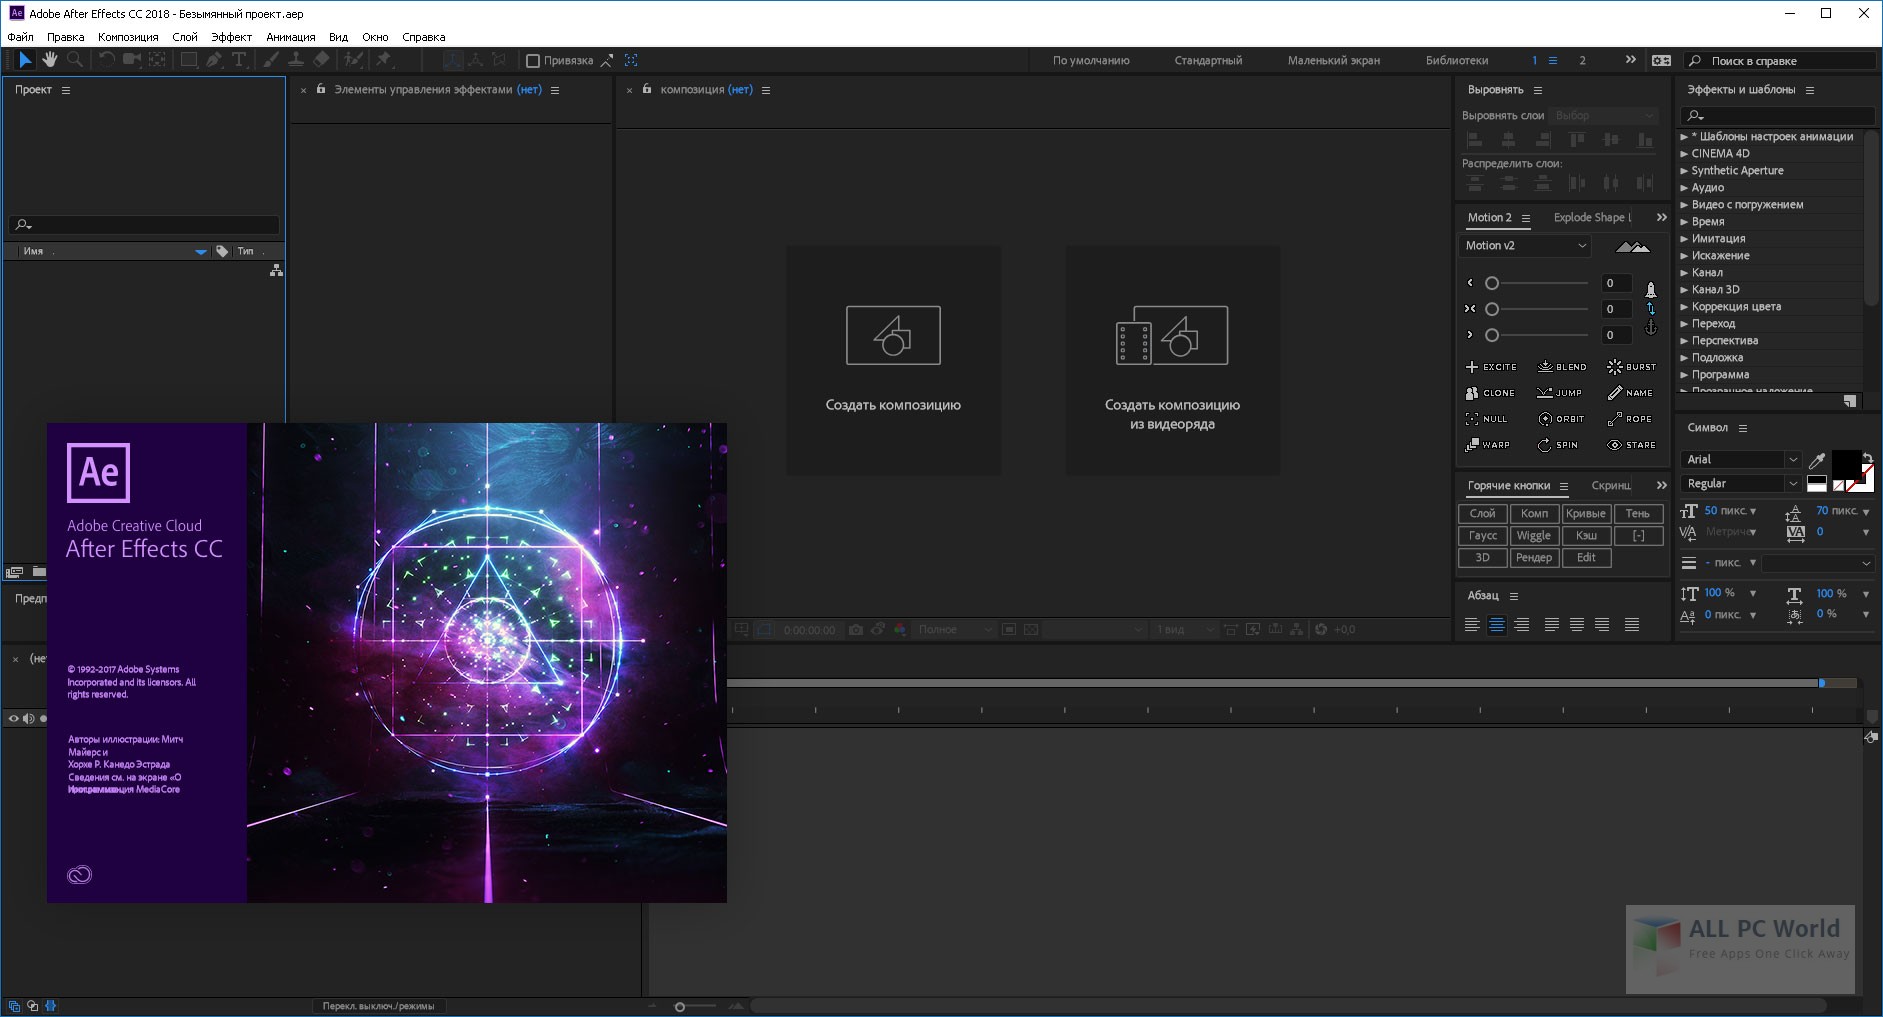 adobe after effects cc 2018 free download for windows 10